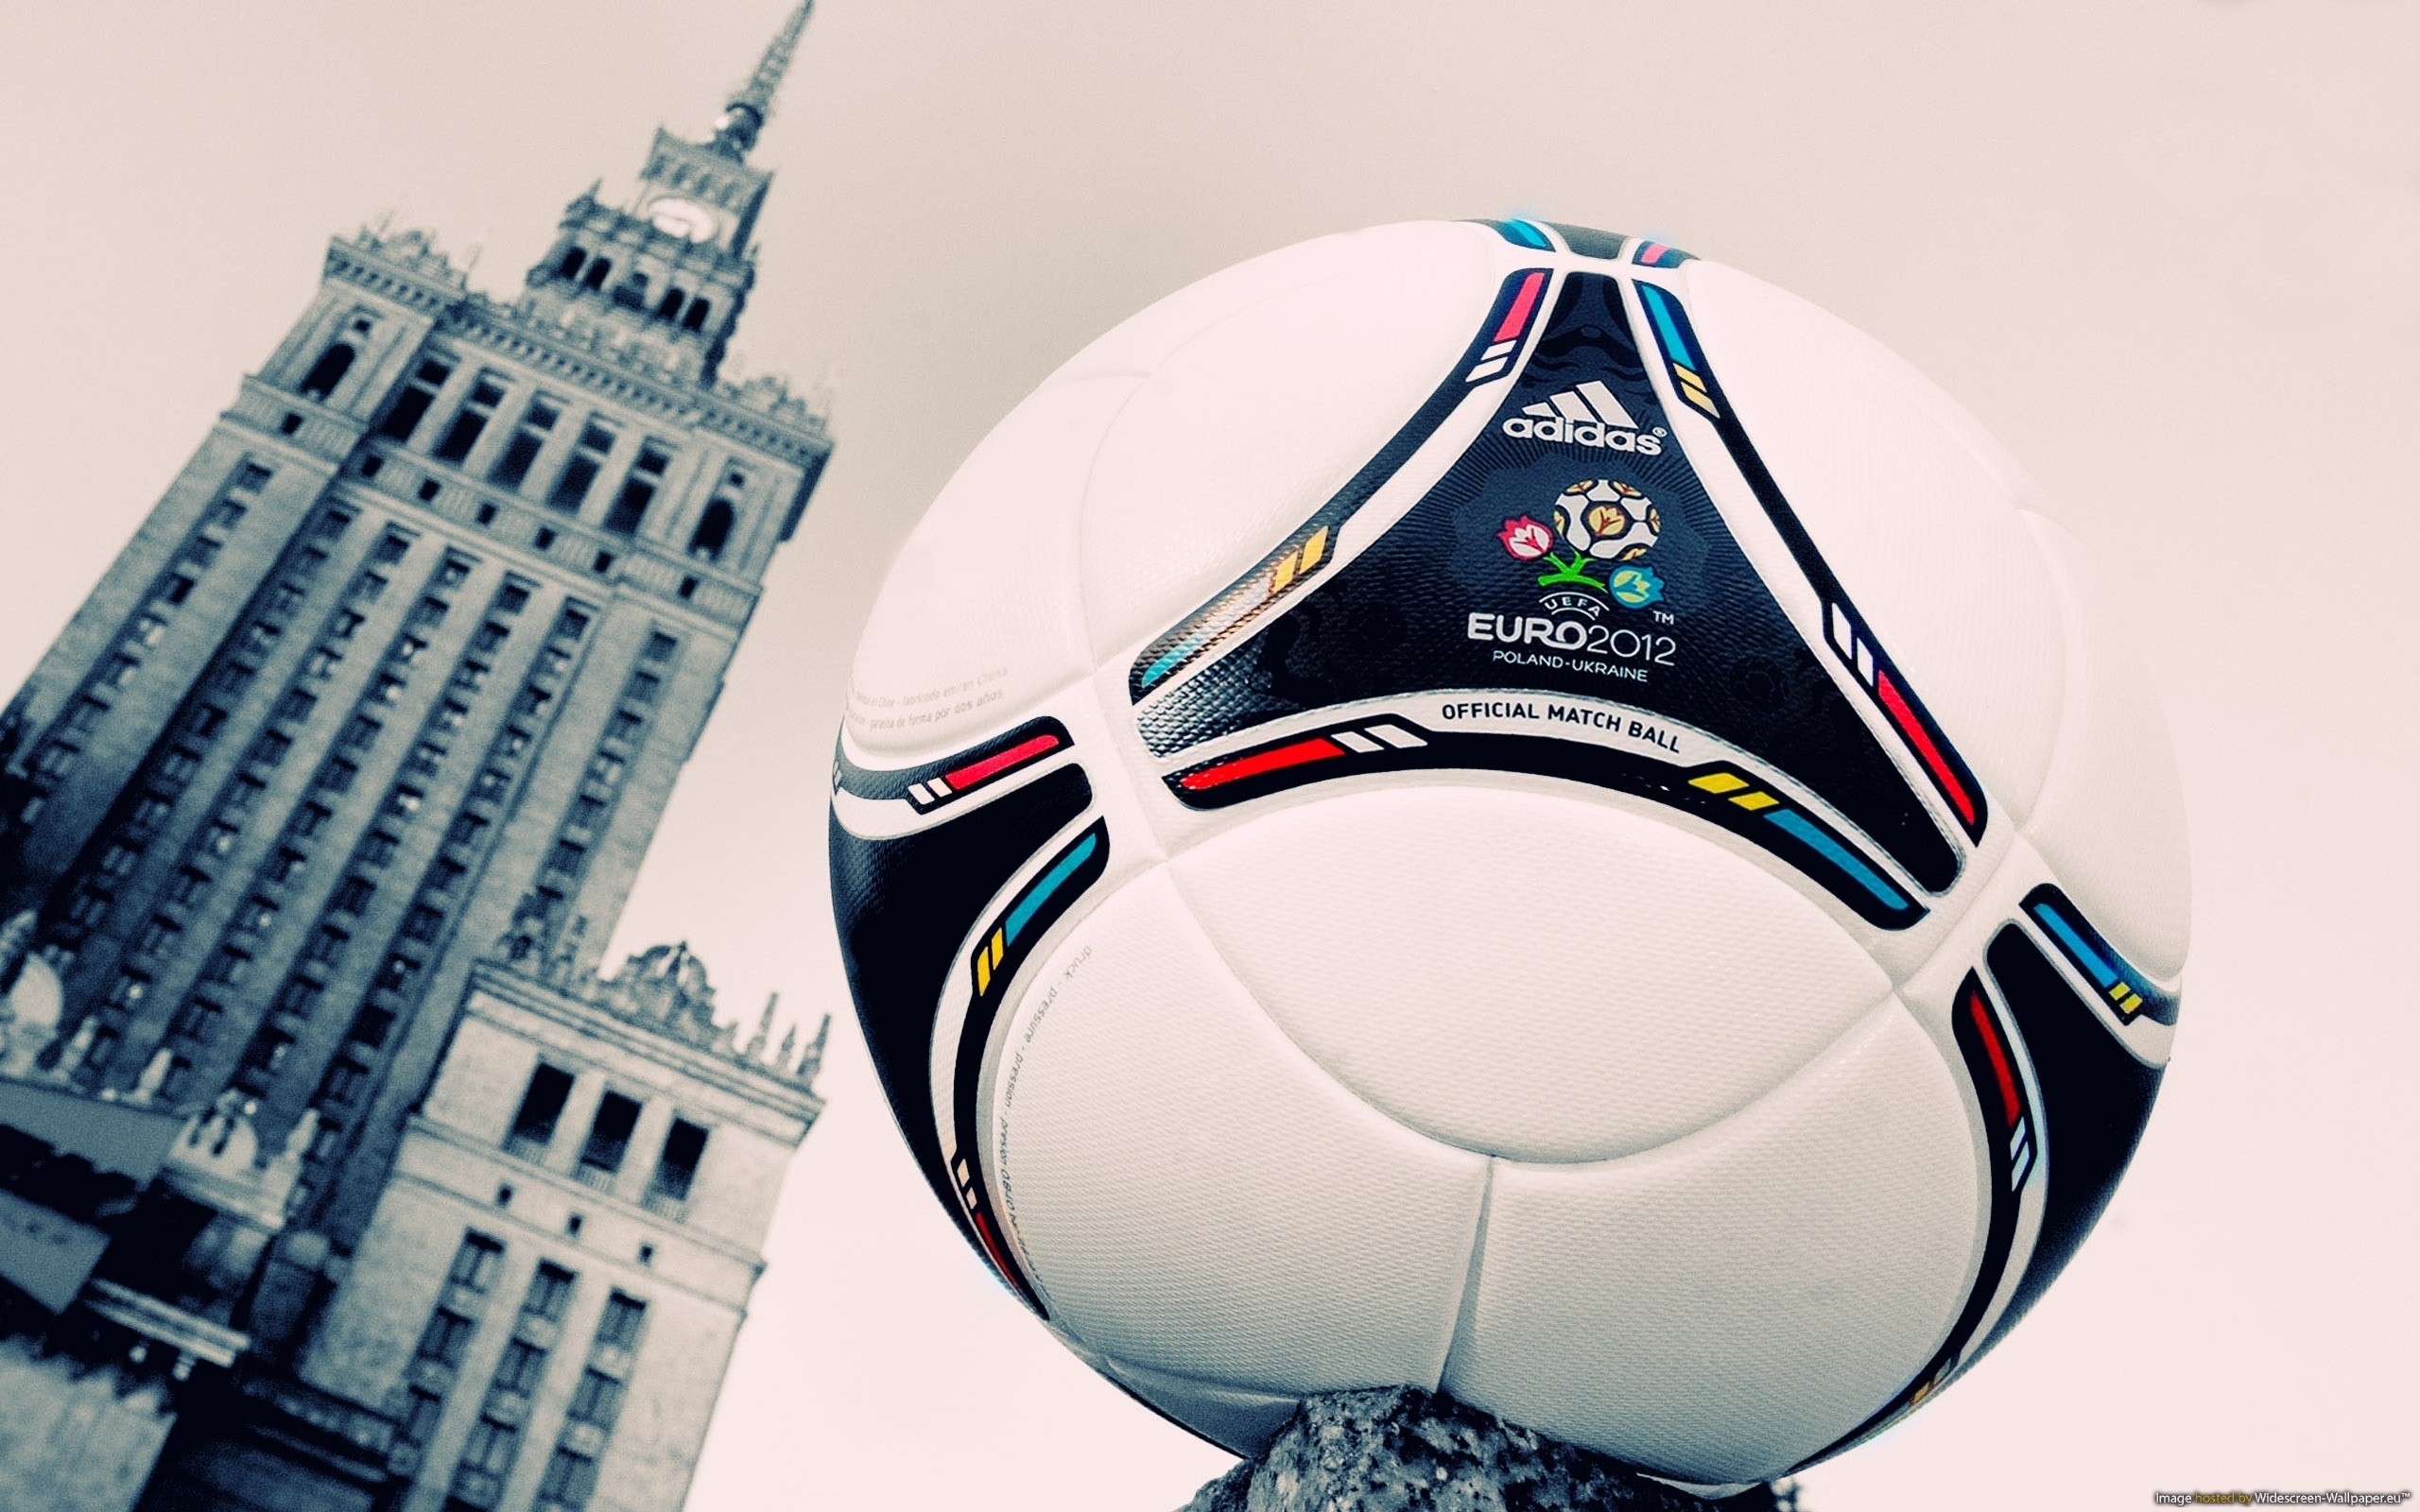 General 2560x1600 ball soccer soccer ball numbers 2012 (Year) sport EURO 2012 closeup watermarked